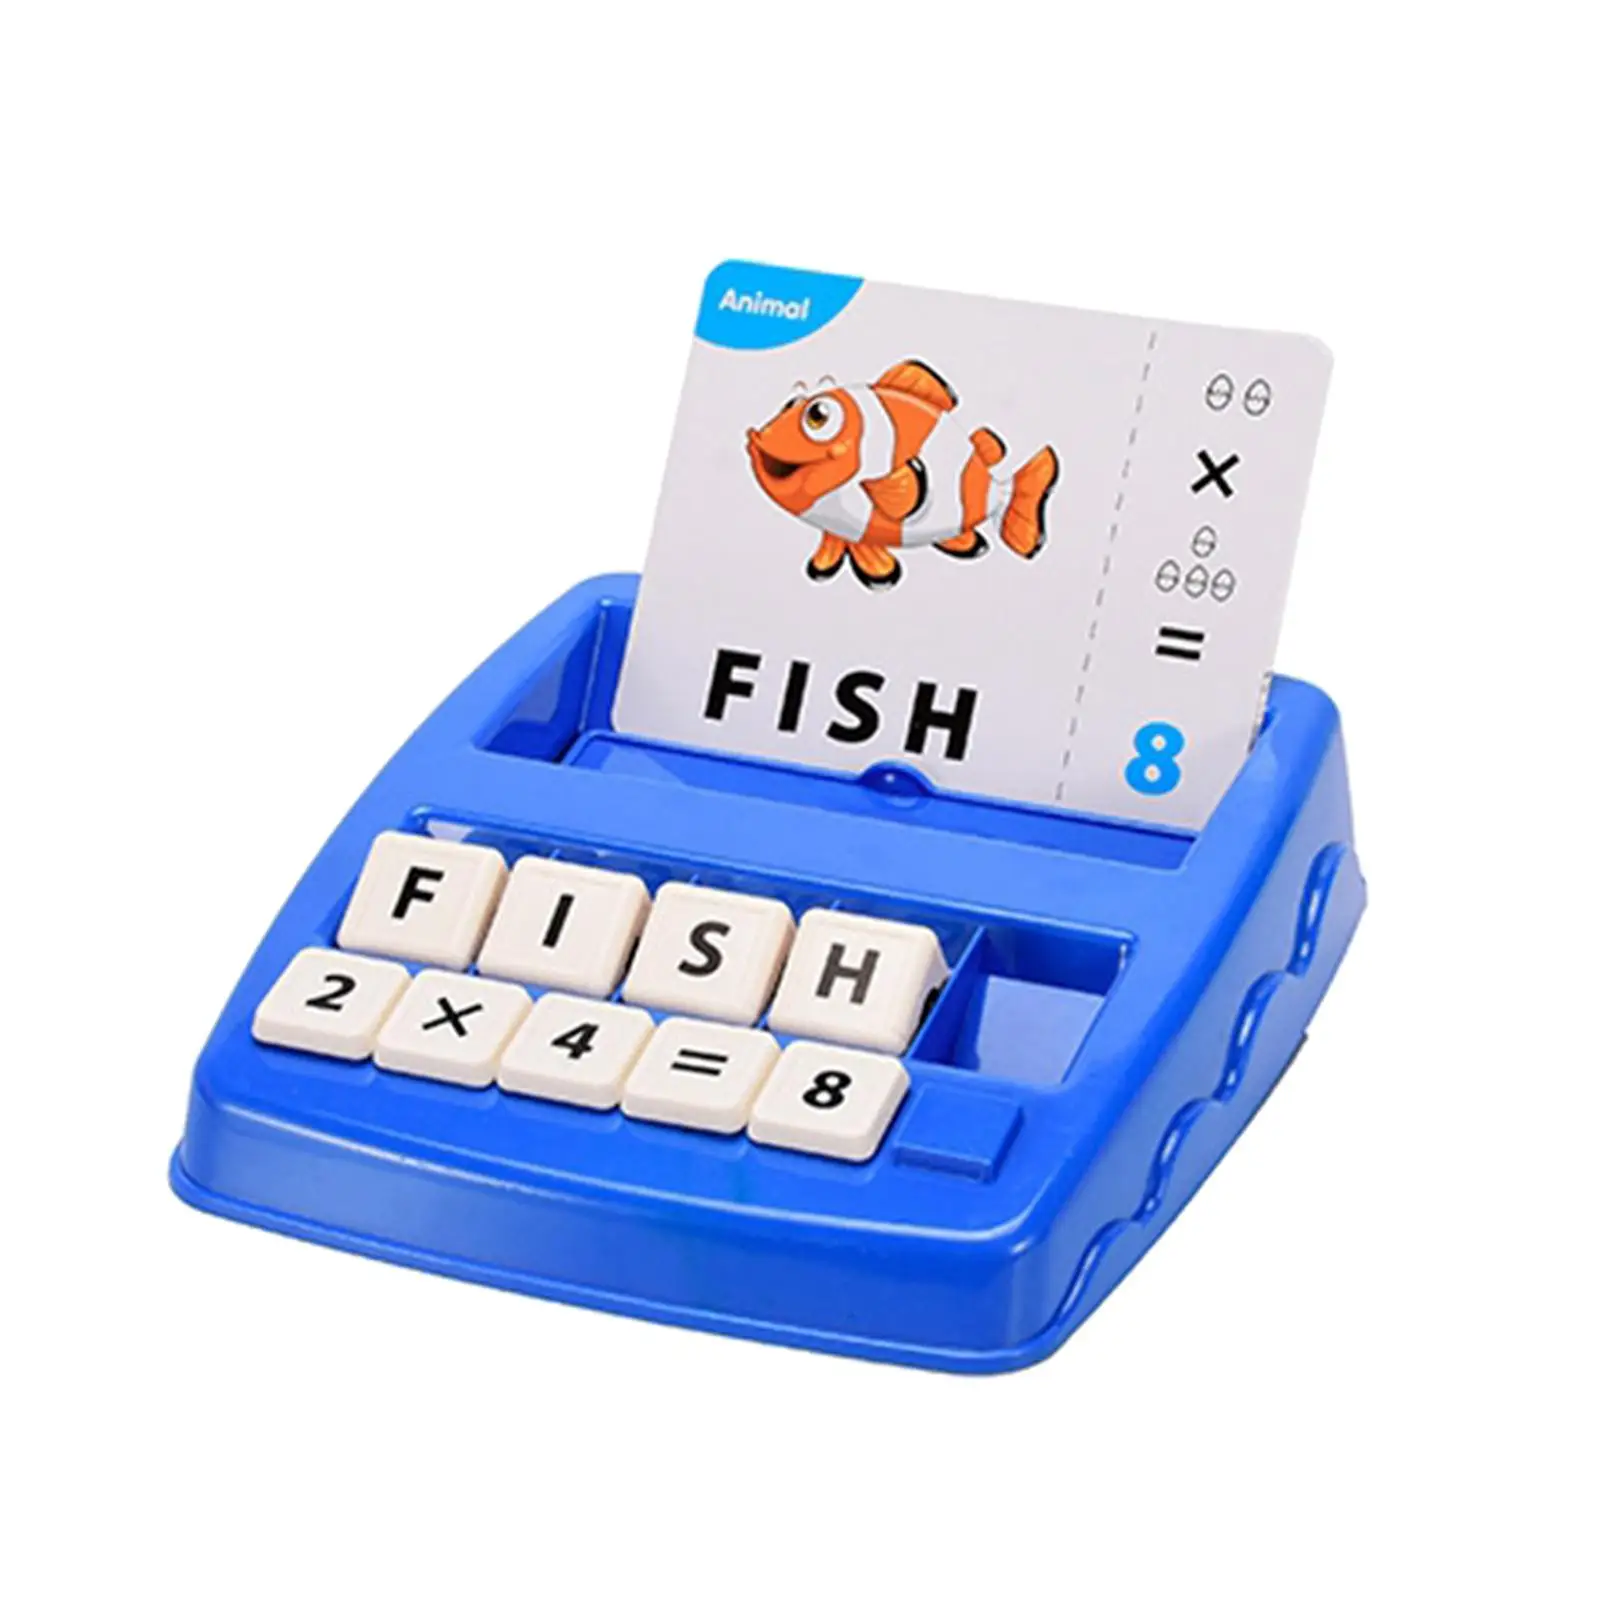 2 in 1 Spelling Reading Game Kindergarten Teaching Tools for Age 3 4 5 6 7 Children Boys and Girls Birthday Gifts